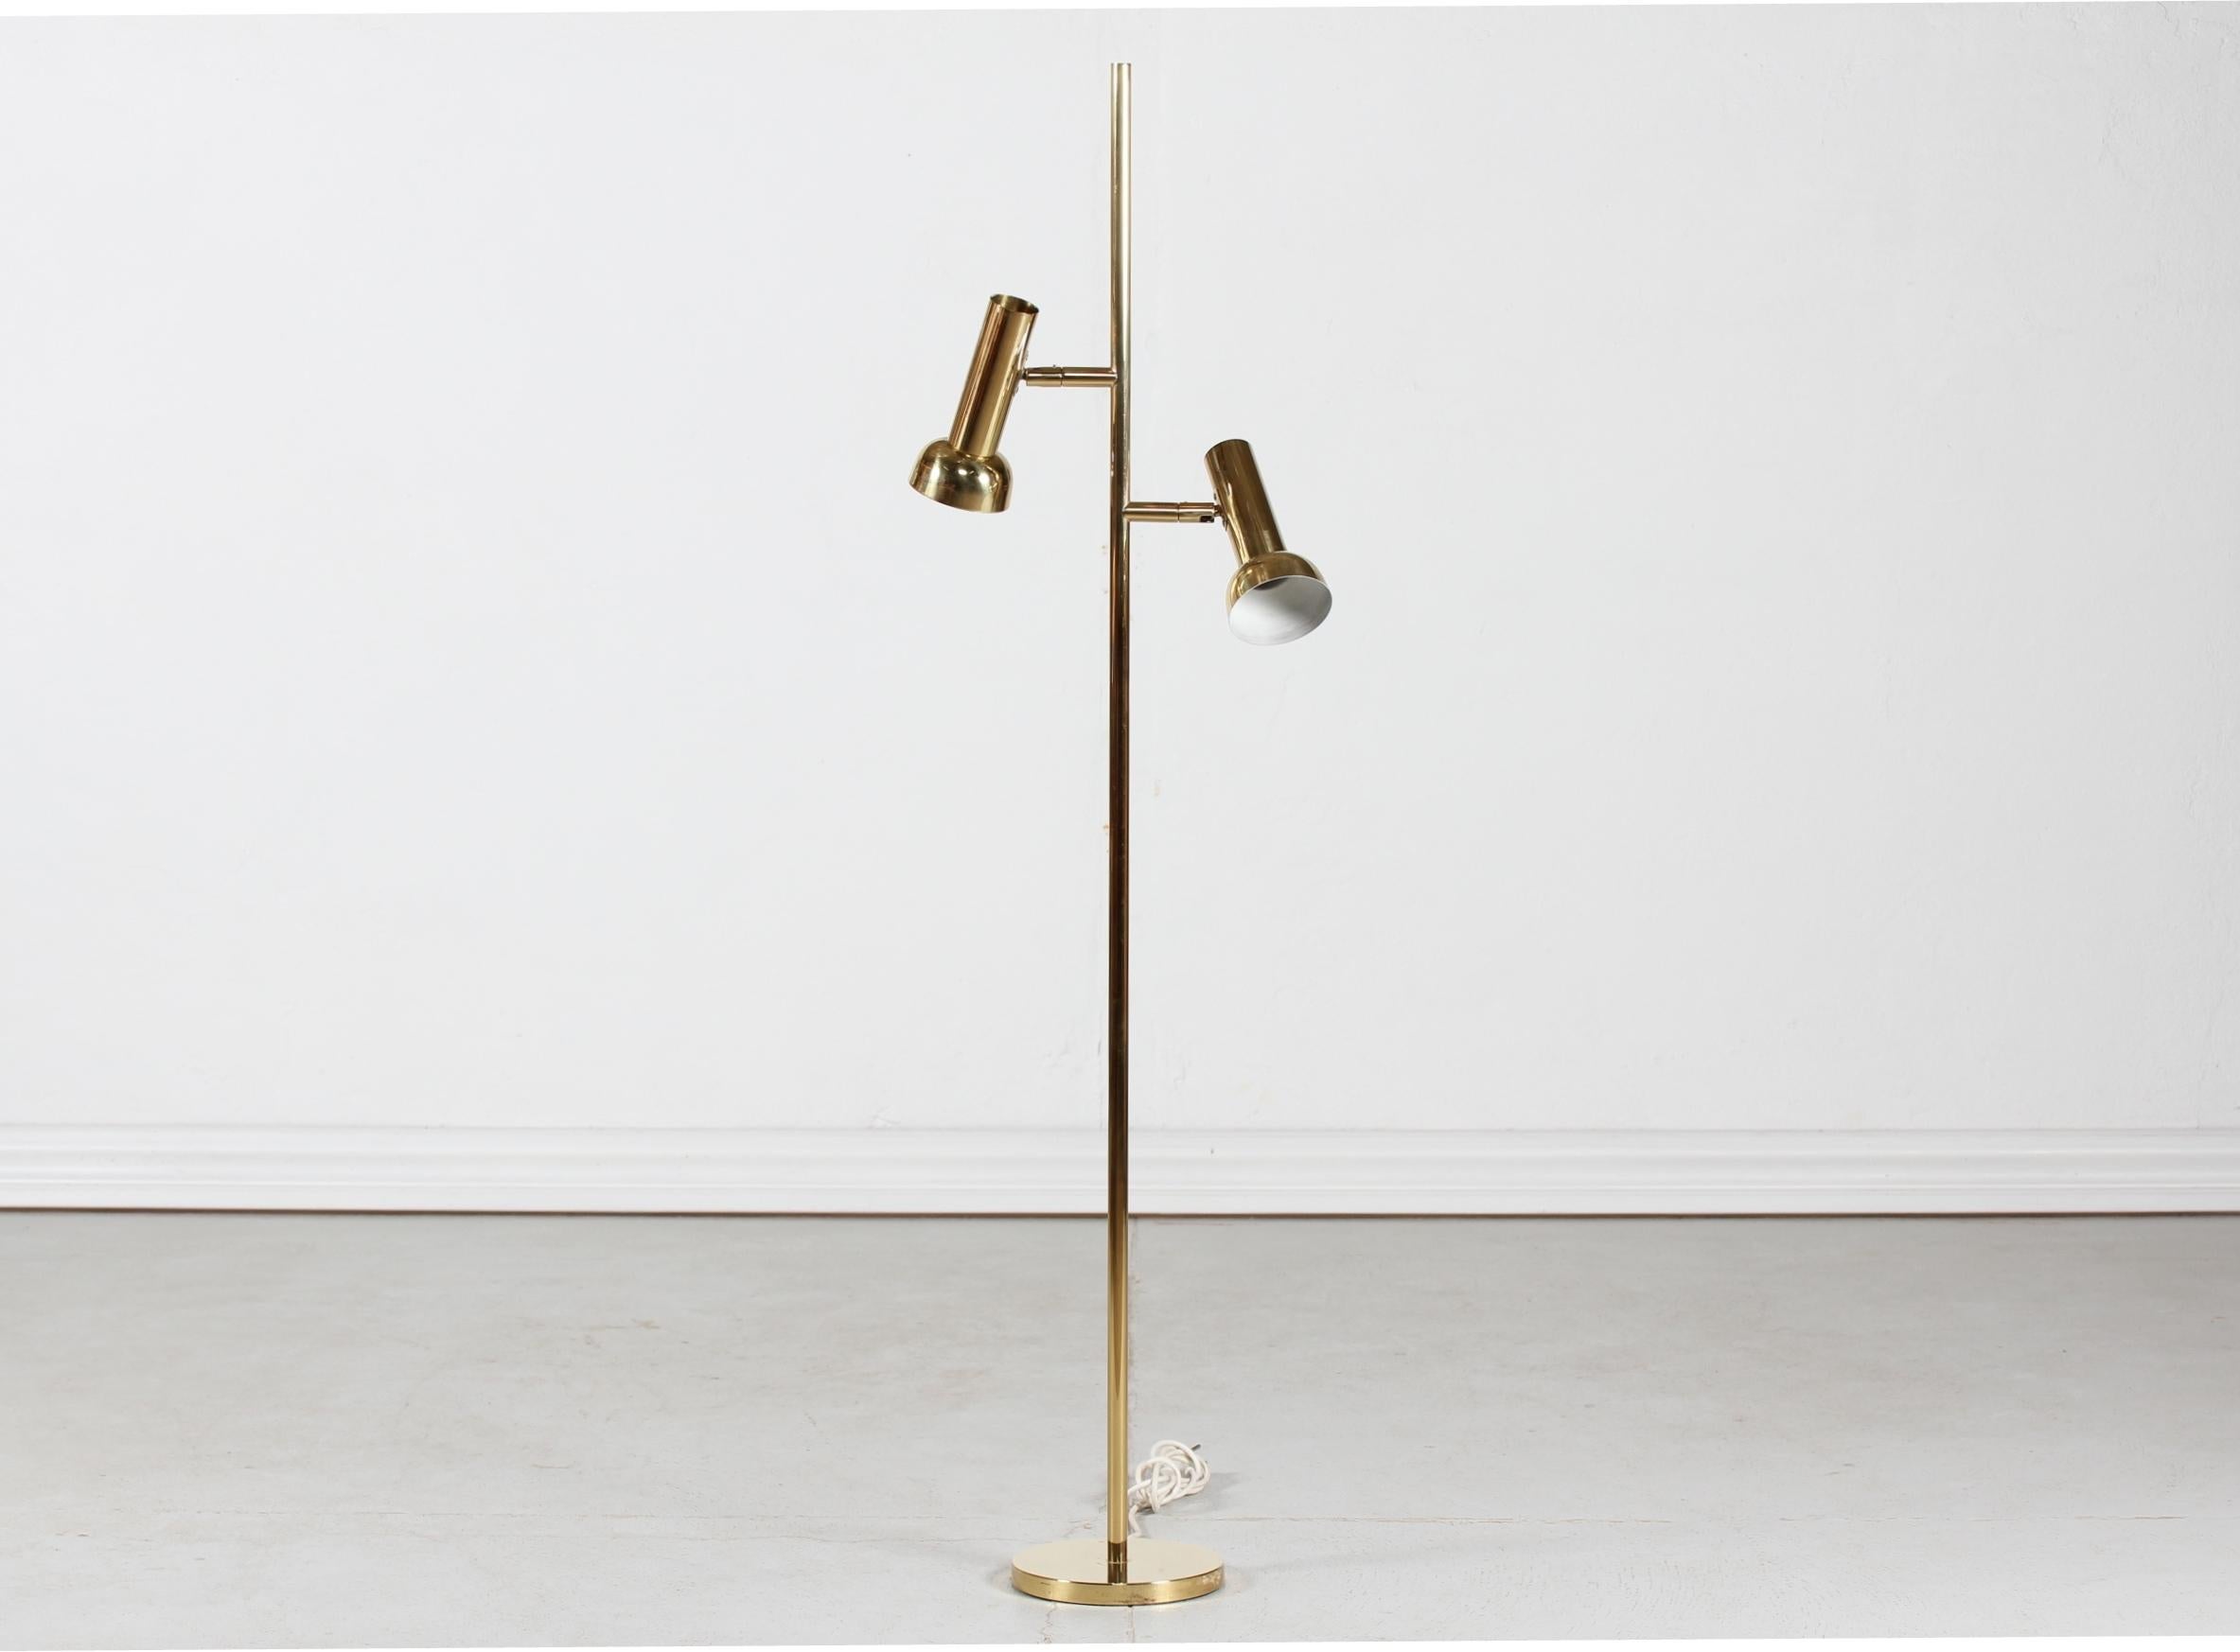 Mid-century Northern European floor lamp from the 1970´s, probably Swedish or German.
The floor lamp is made in good quality of brass with lacquer and has adjustable shades.

Height 149 cm
Width 35 cm with the shades in vertical